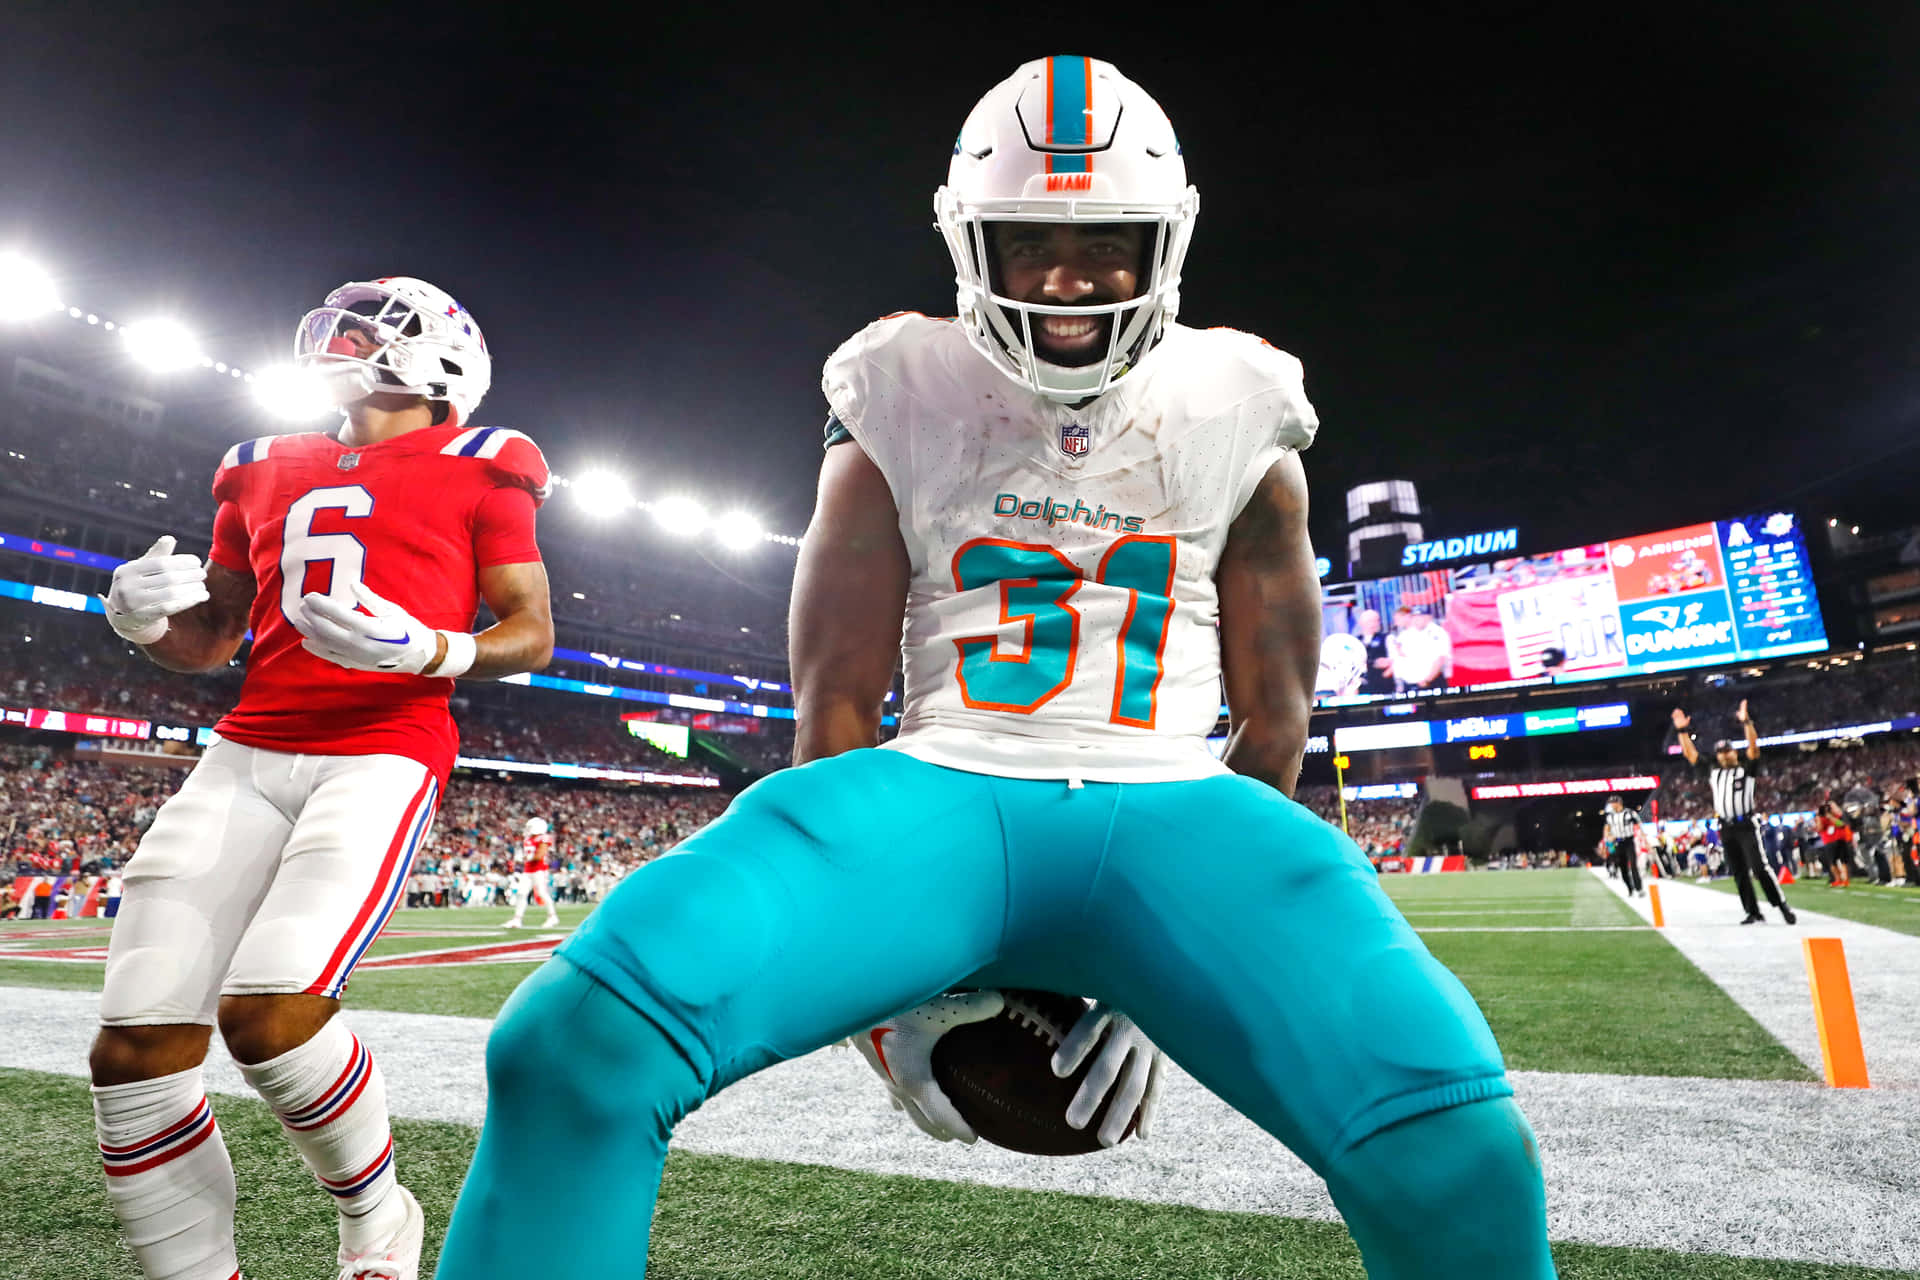 Dolphins Player Celebrationat Night Game Wallpaper